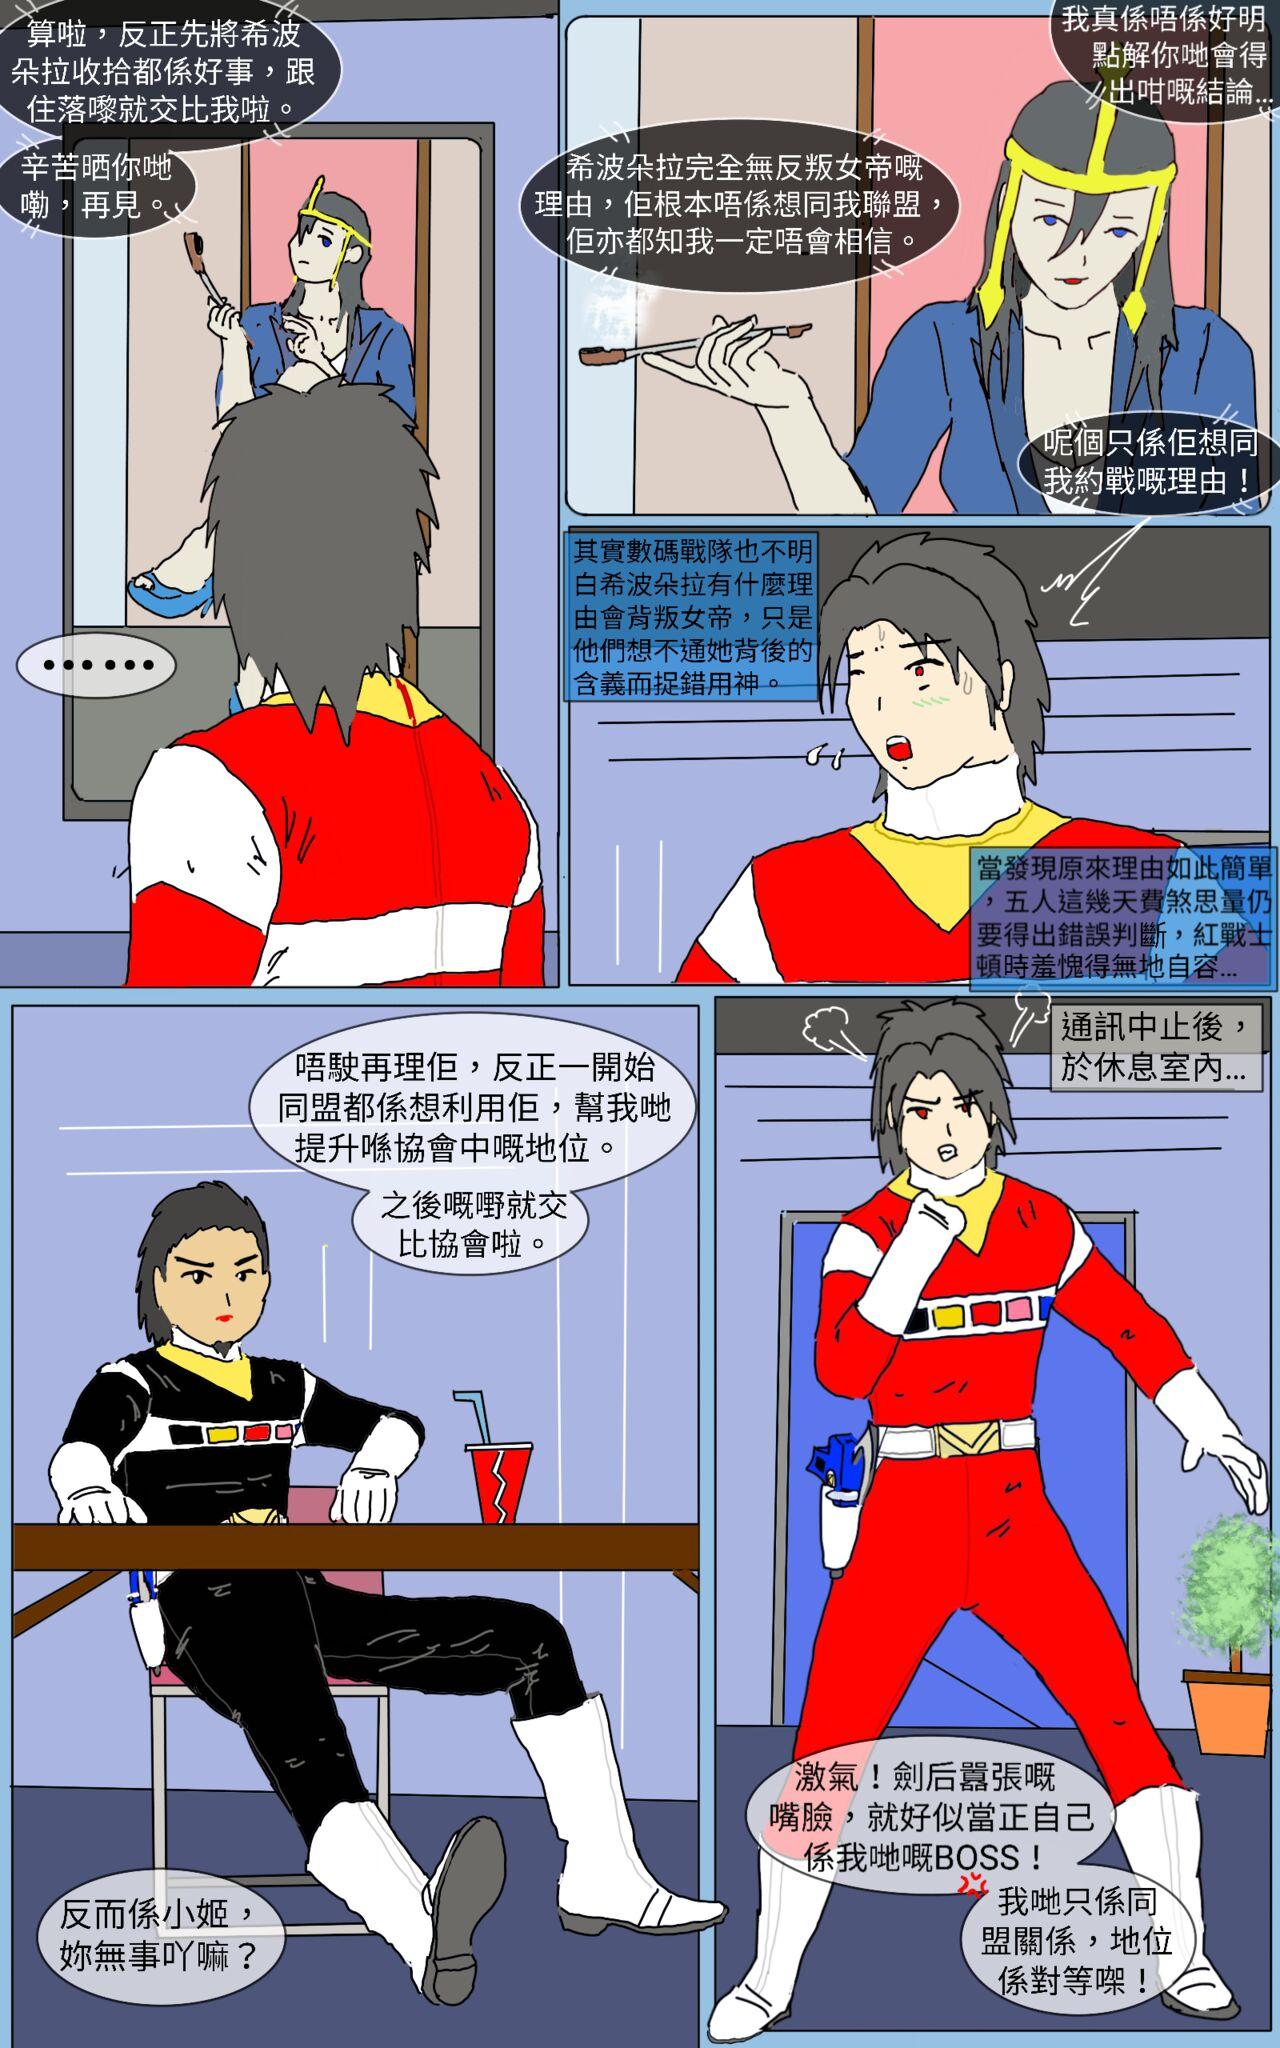 Tied Mission 16 - Super sentai High Heels - Page 4